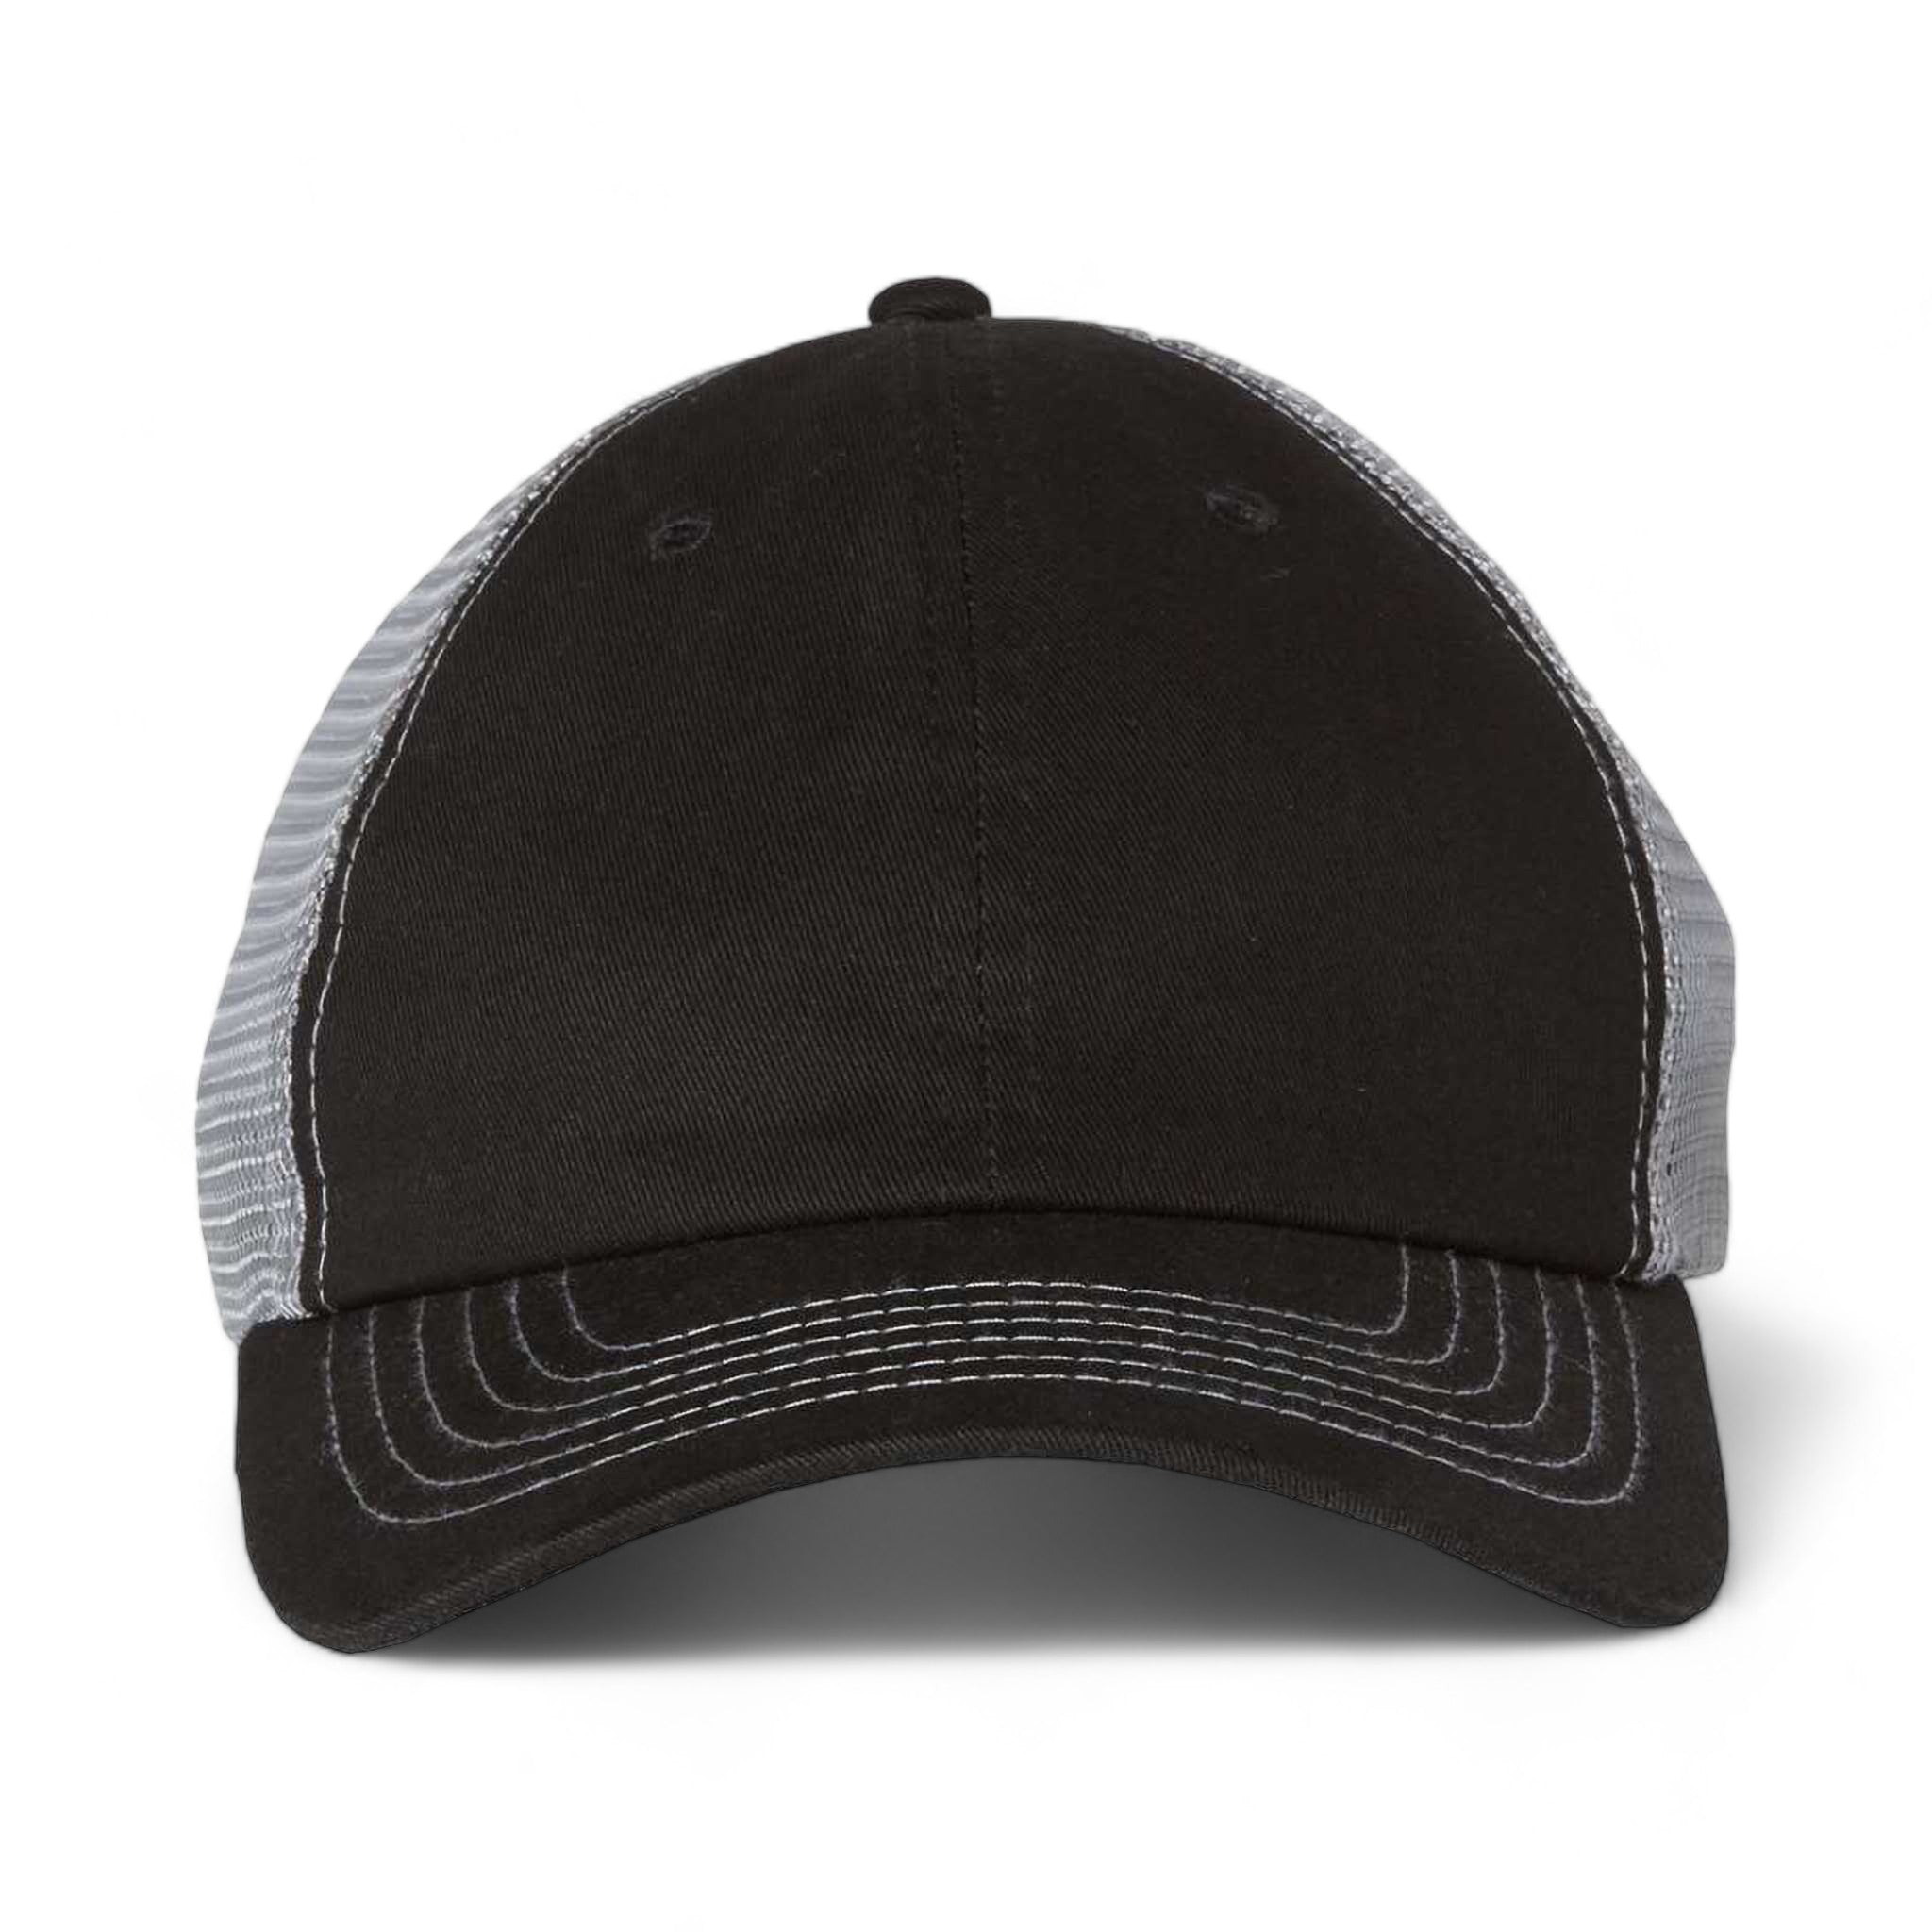 Front view of Sportsman 3100 custom hat in black and grey